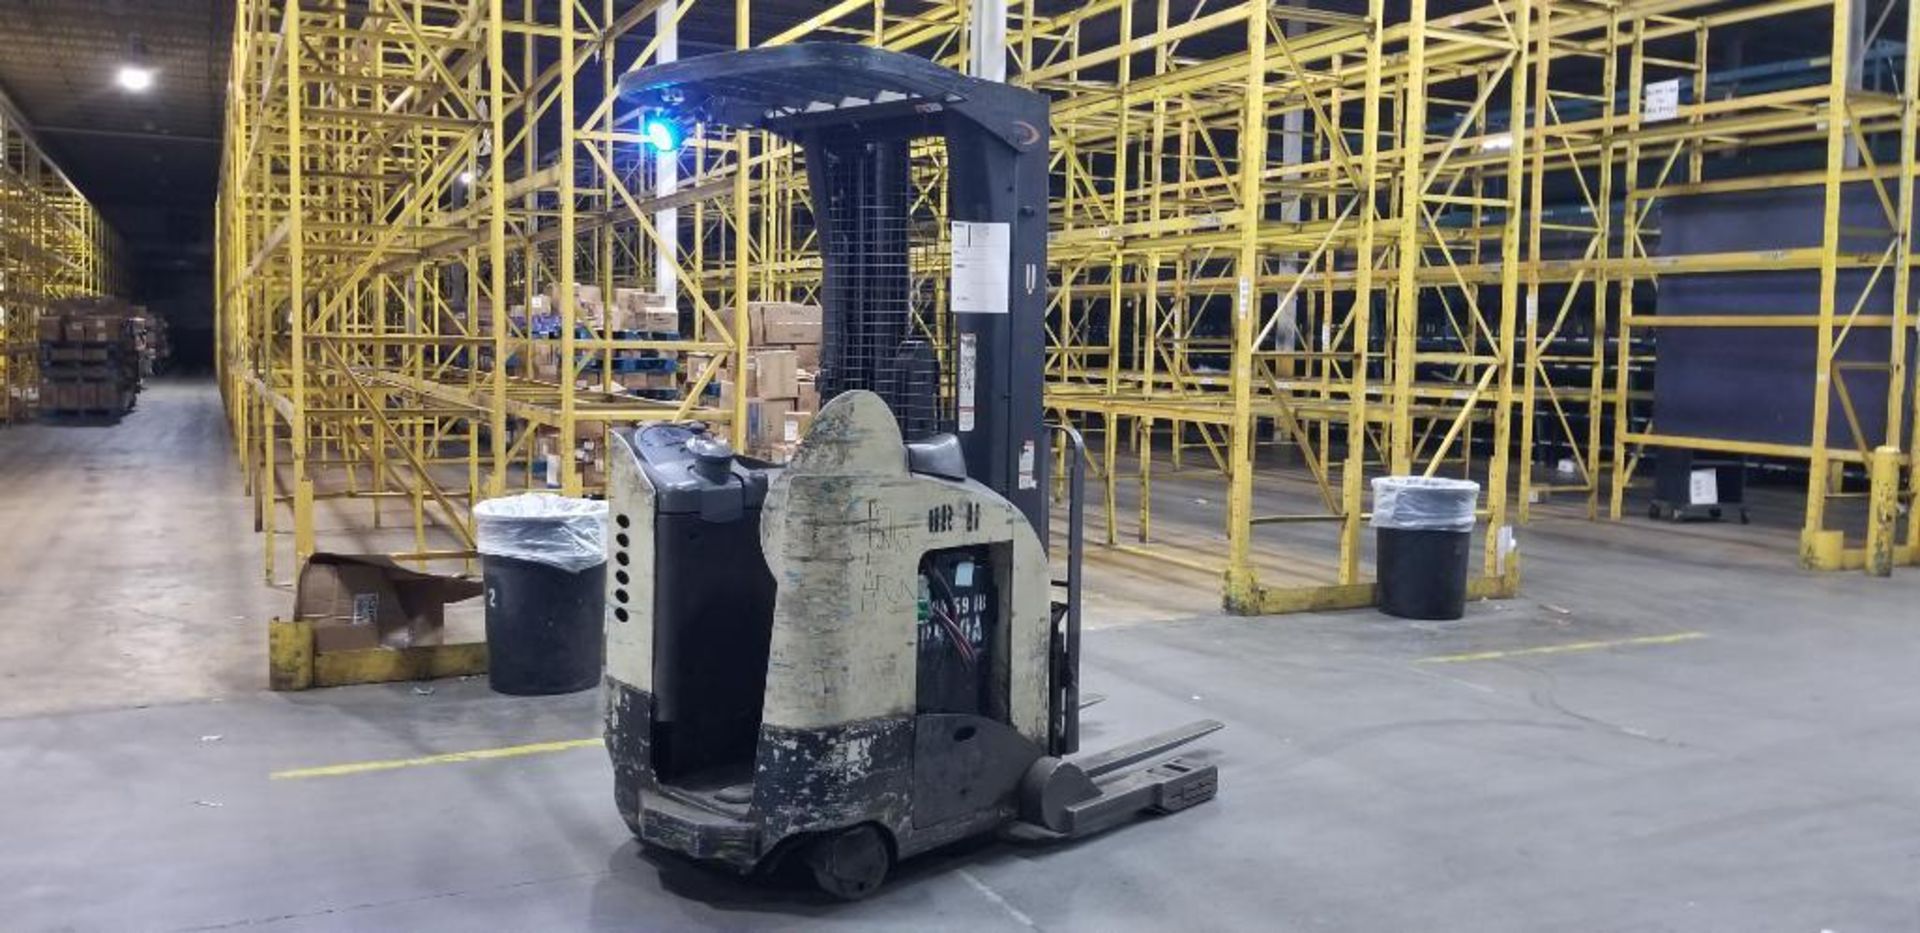 Crown RR 5200 Series Electric Reach Truck, Model RR5220-45, S/N. 1A274892, 4,500 LB. Lift Capacity, - Image 2 of 8